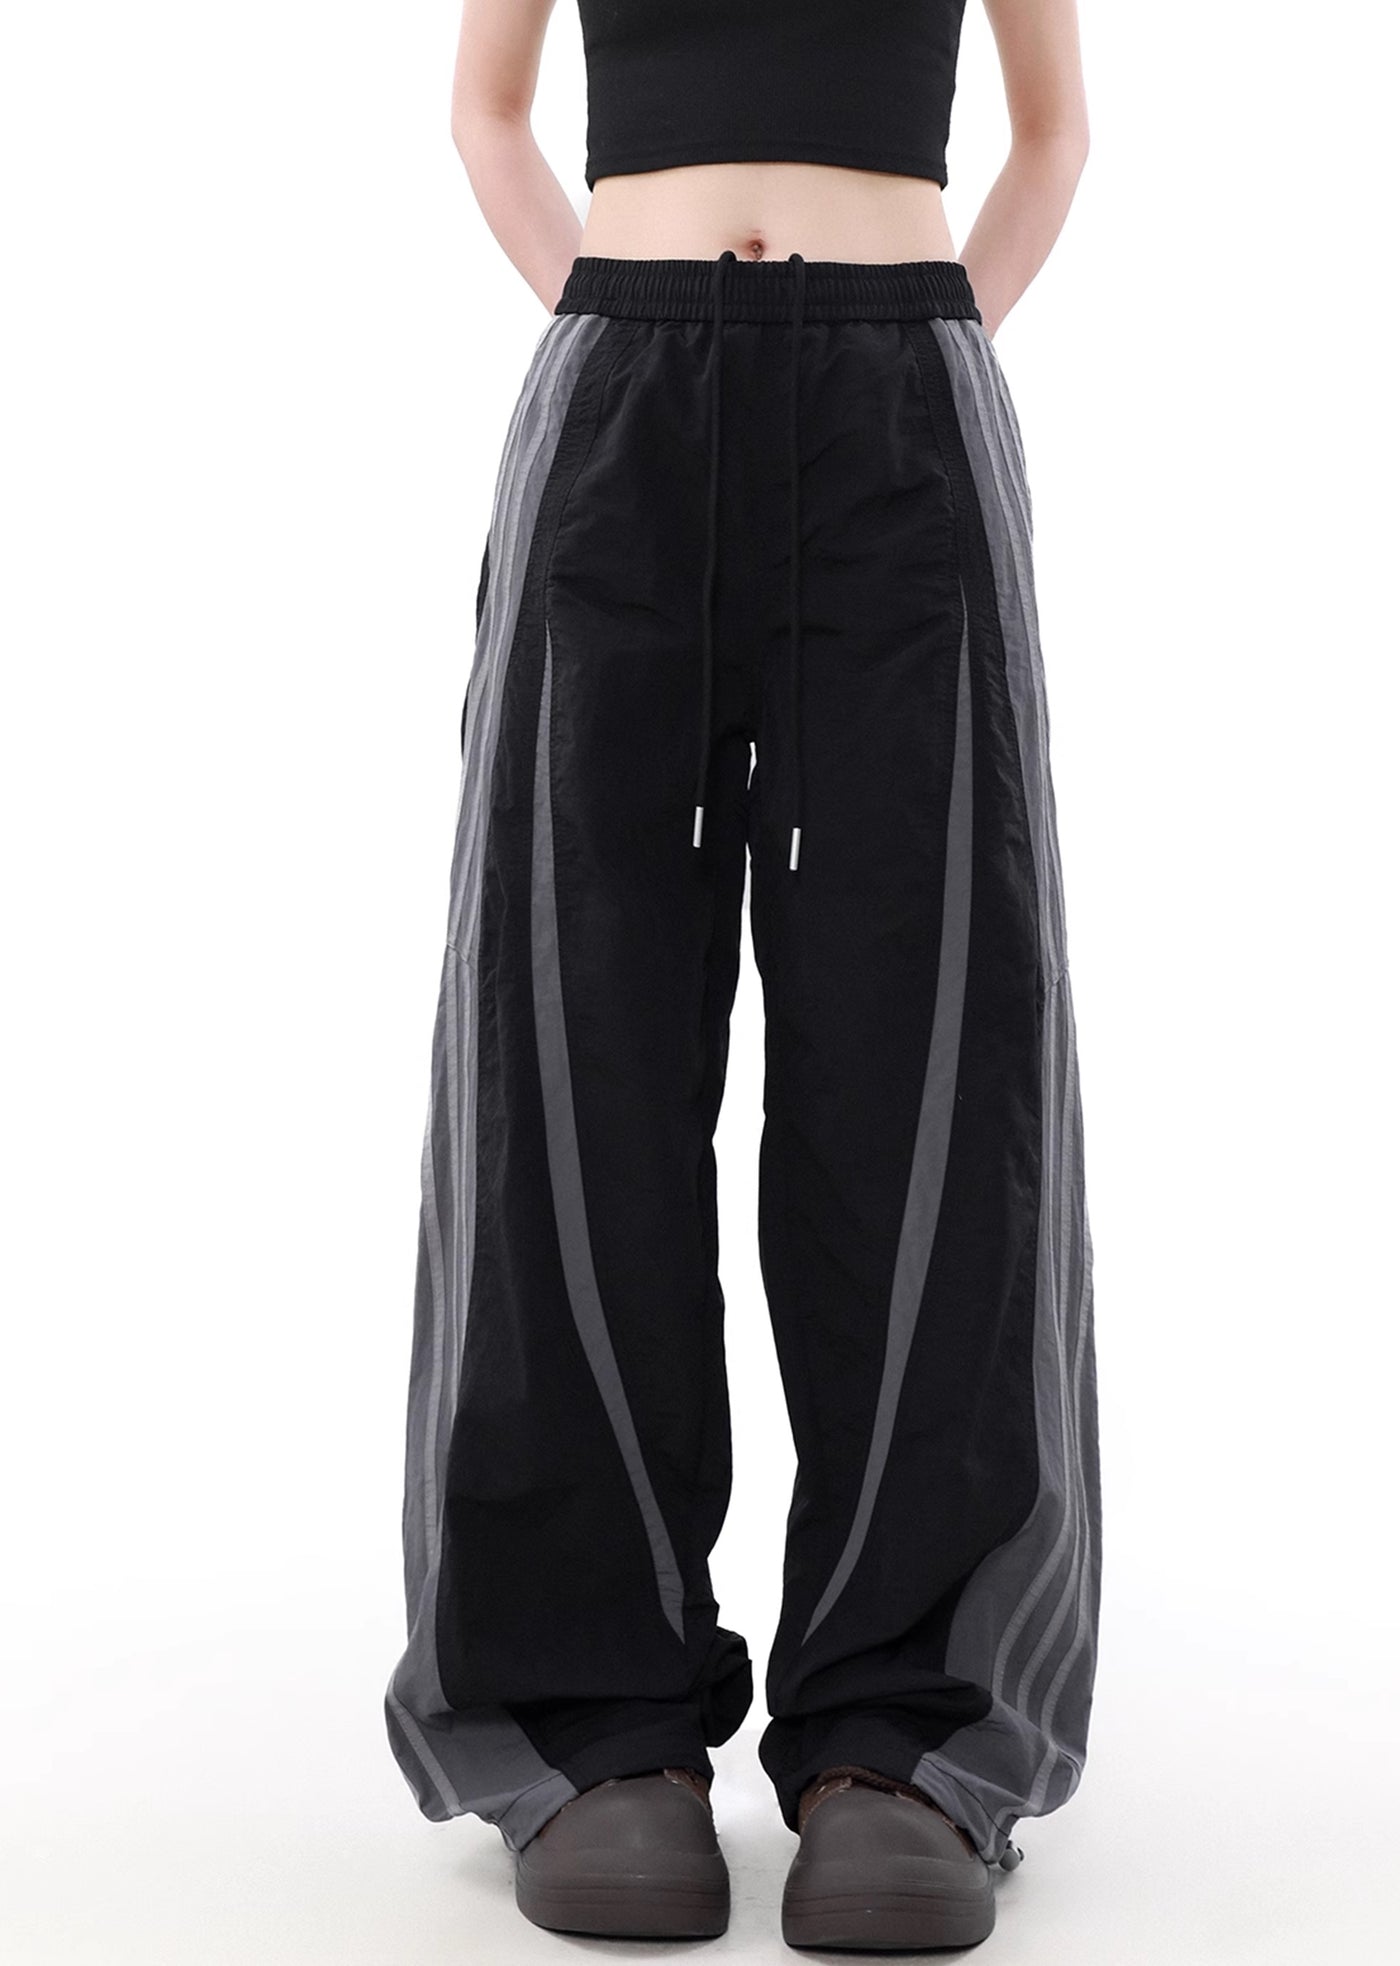 【MR nearly】Sideline sporty casual main booth pants  MR0111